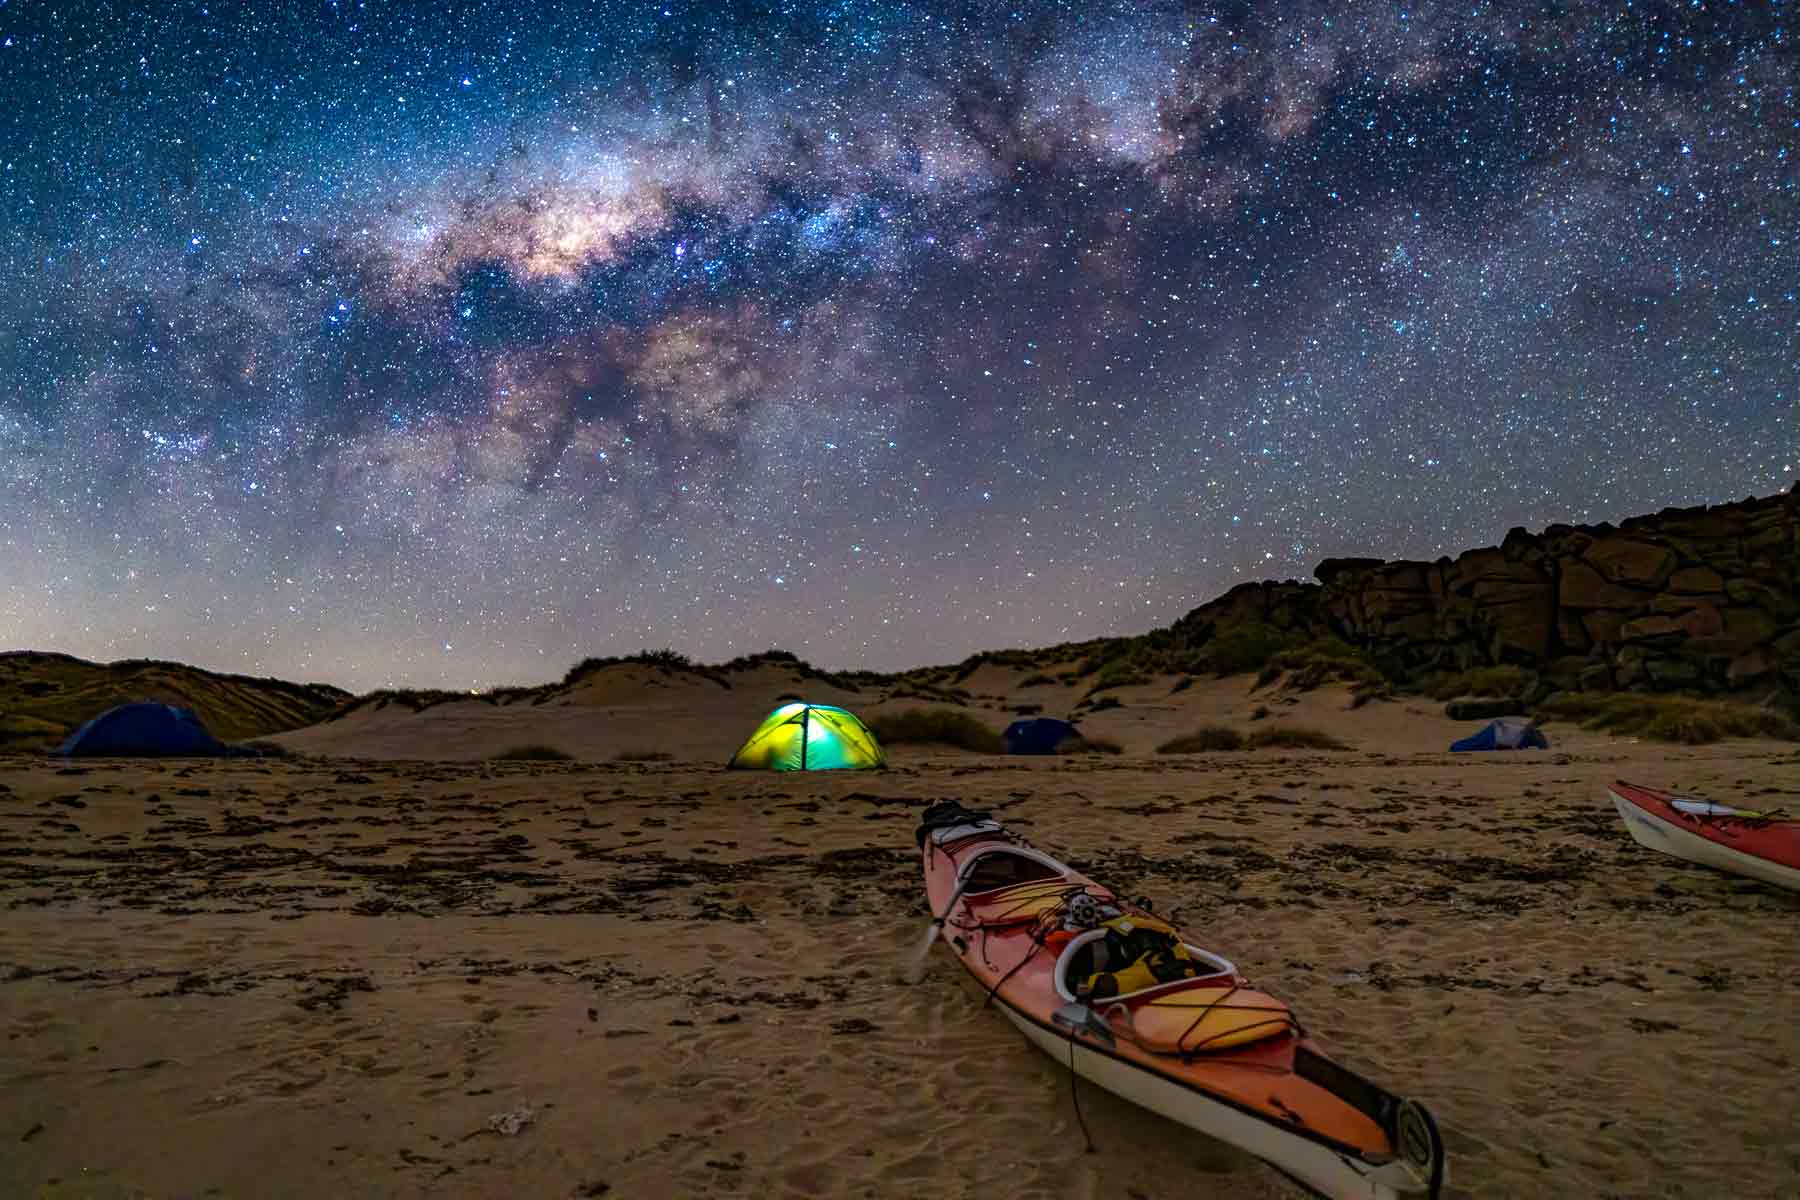 An illuminated tent under the vibrant Milky Way, with a sea kayak in the foreground, in the Dampier Archipelago